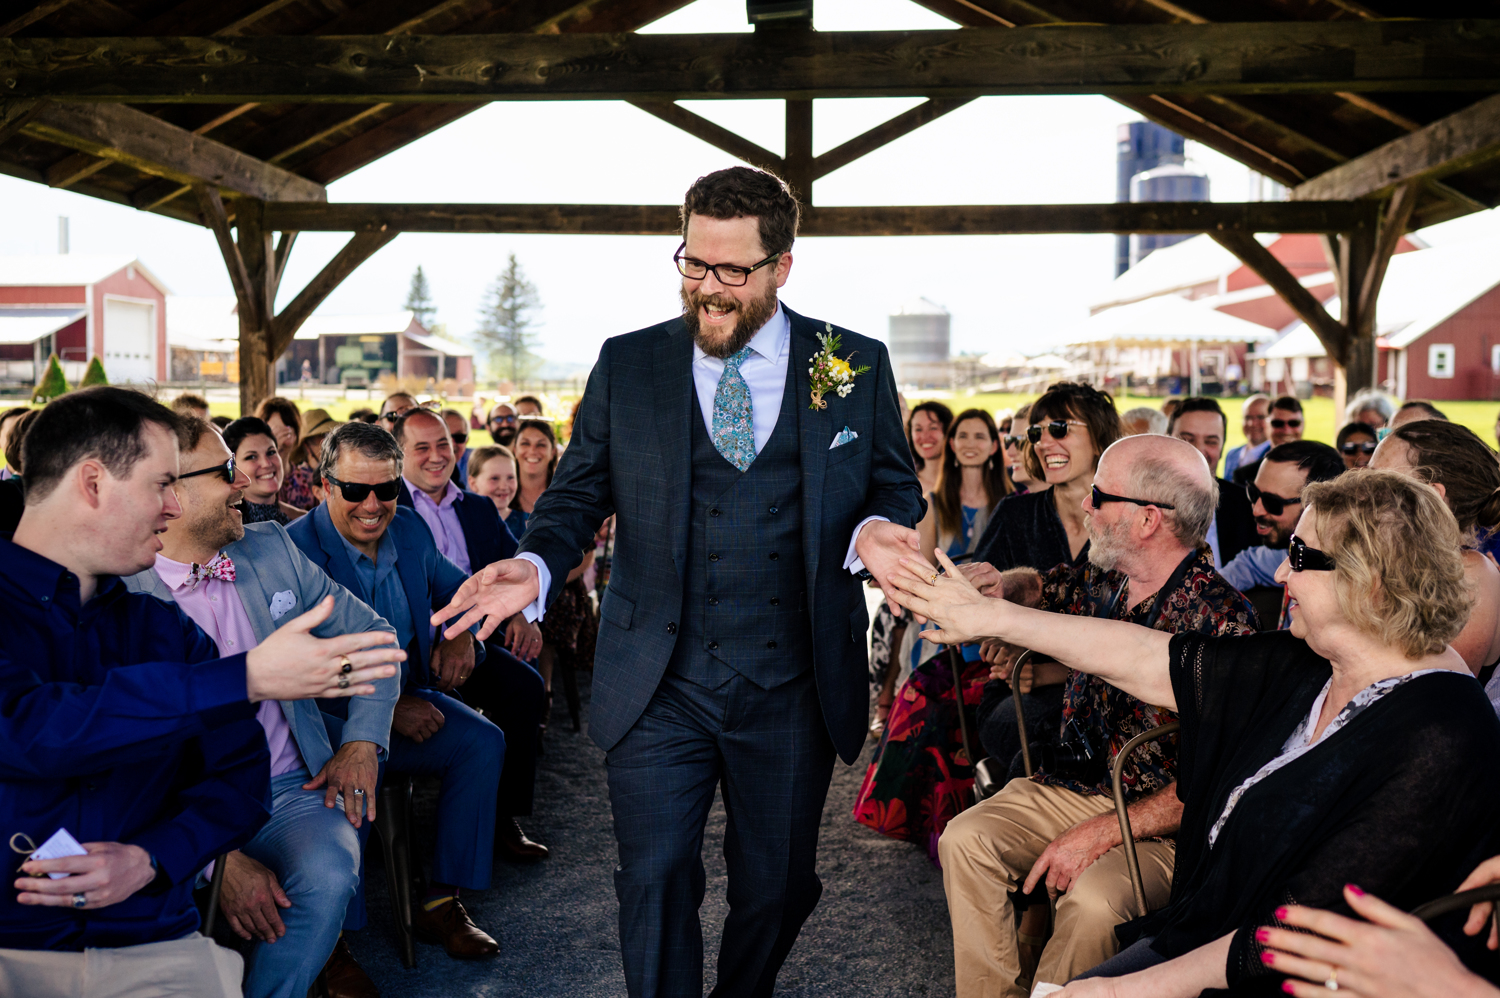 Jed receiving high fives as he walks down the aisle at his Vermont wedding